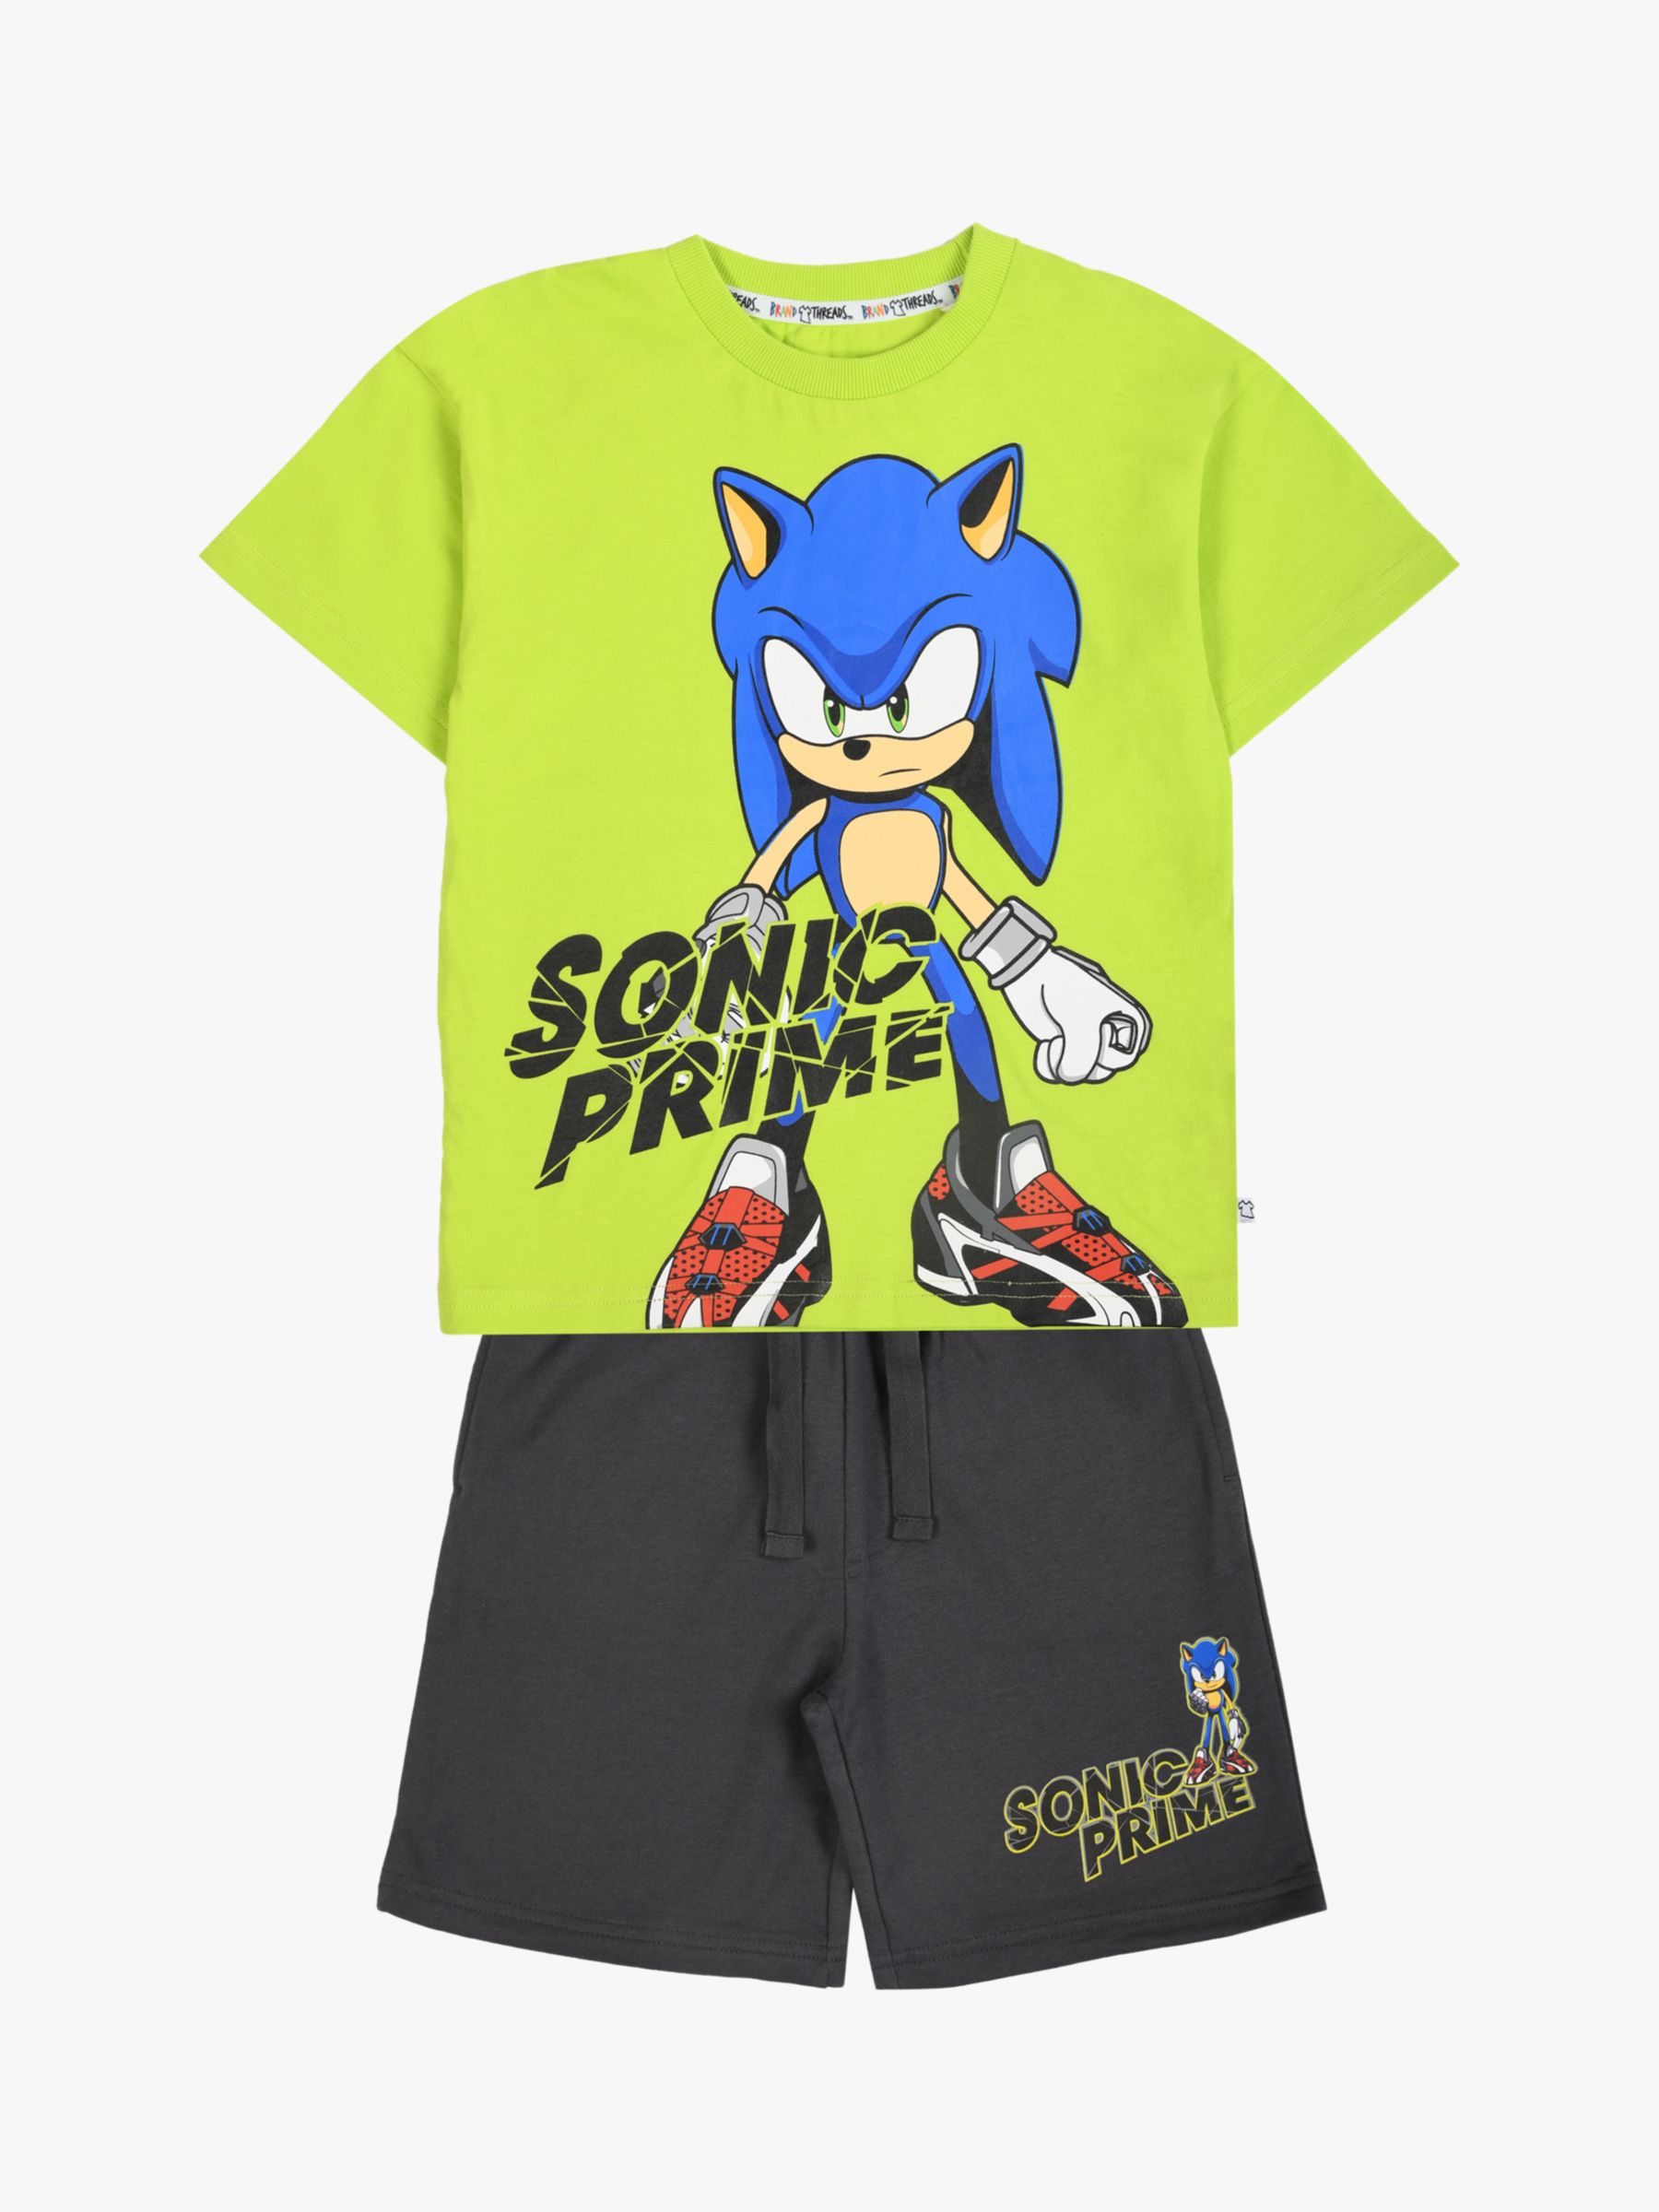 Brand Threads Kids' Sonic Prime T-Shirt and Shorts Set, Green/Multi, 10-11 years